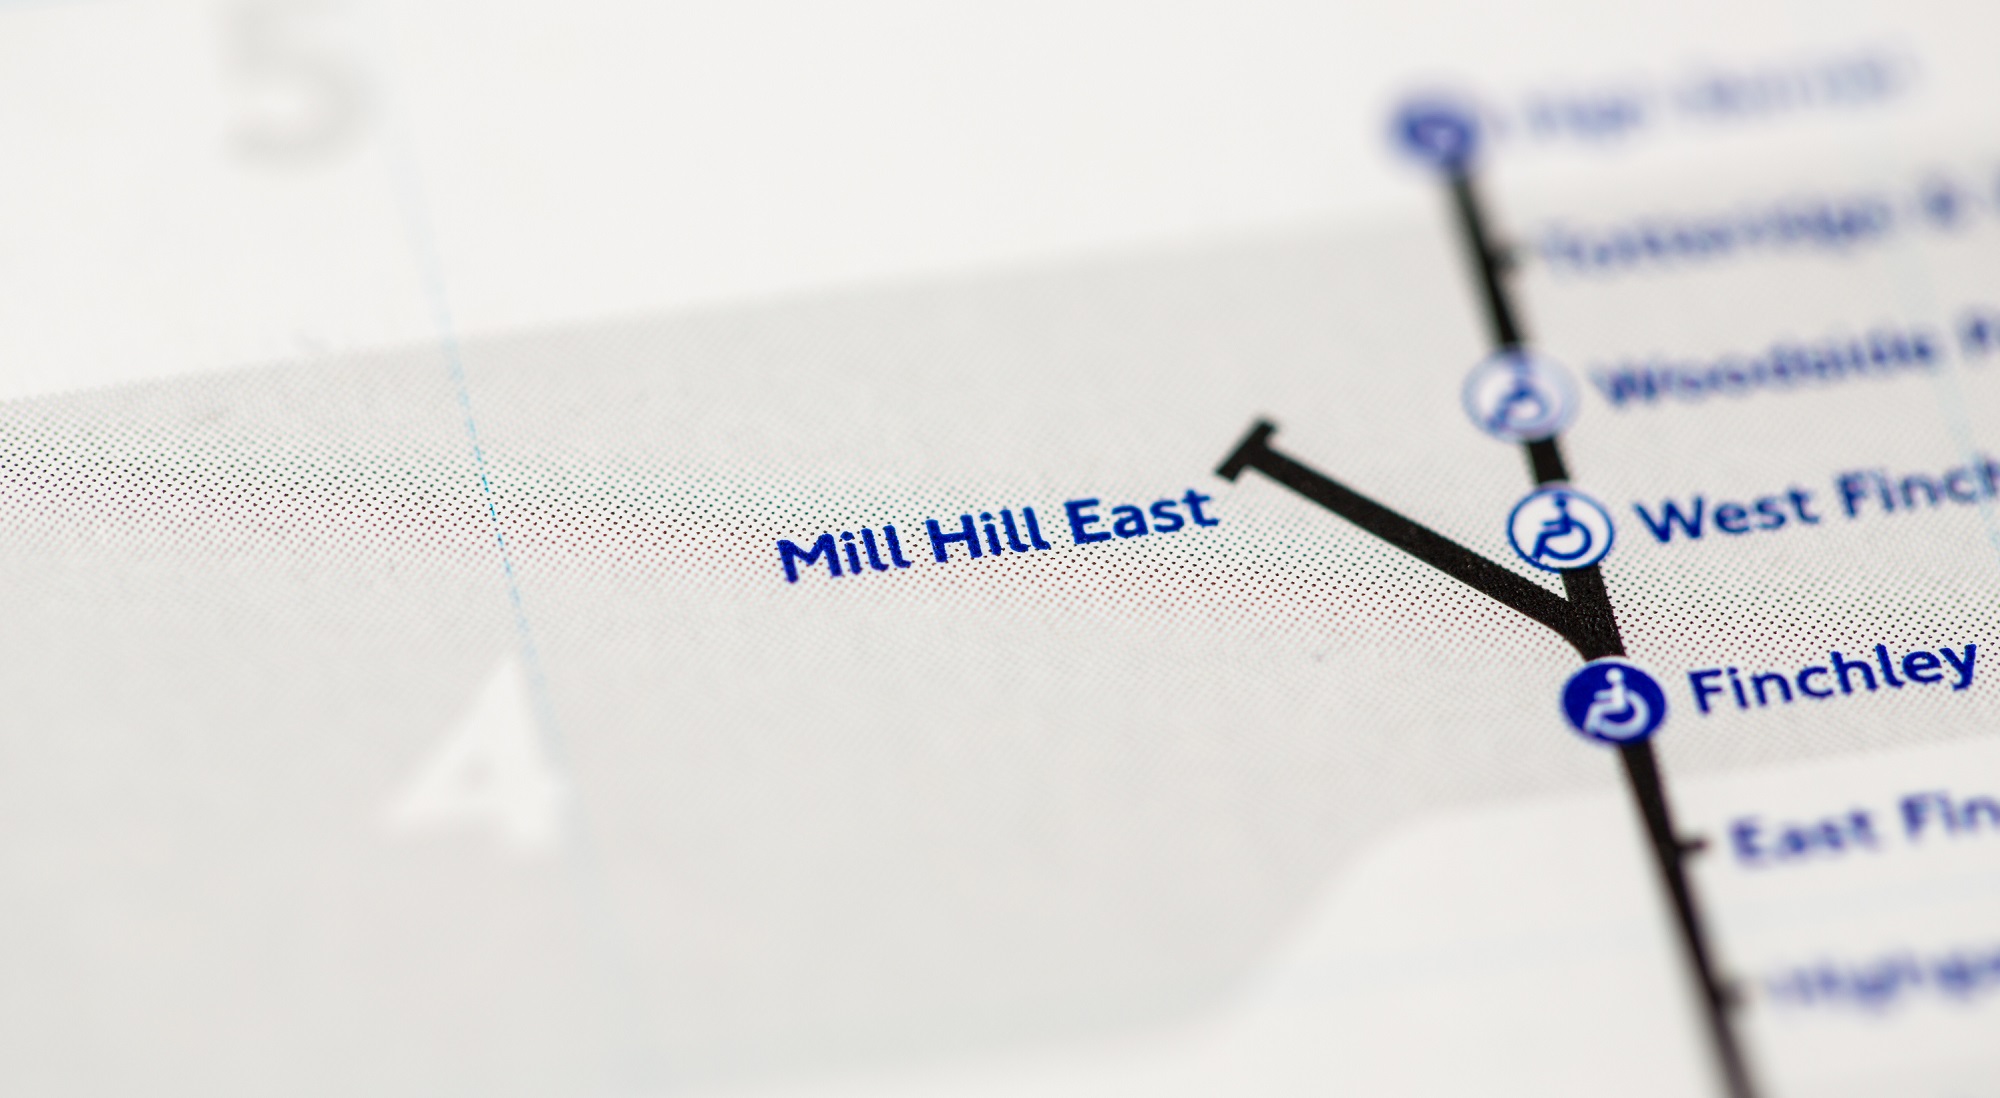 Everything you need to know about living in Mill Hill